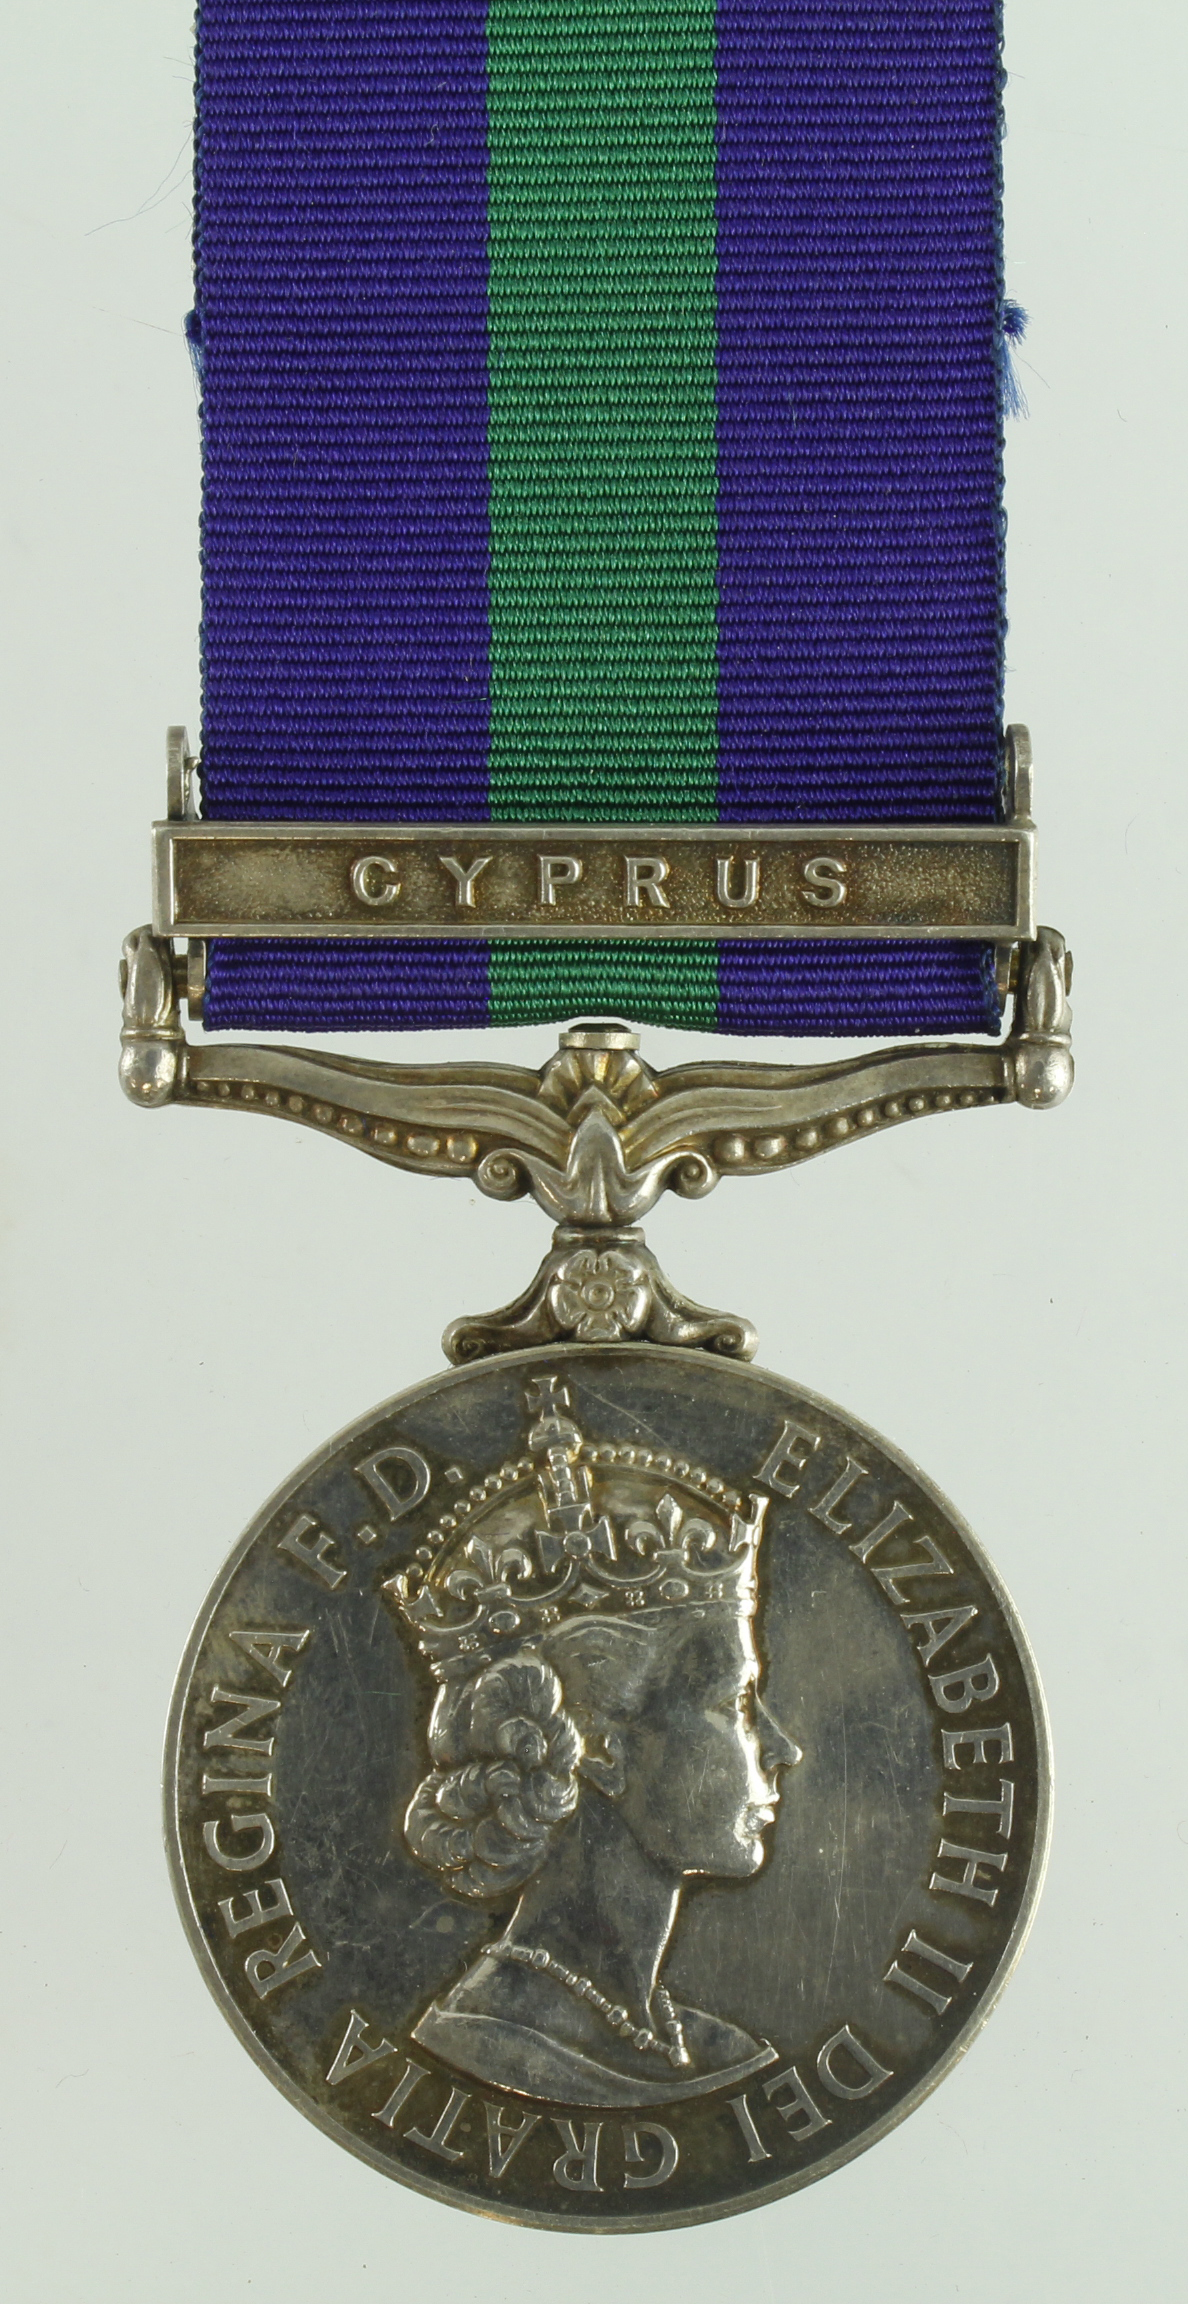 GSM QE2 with Cyprus clasp (23367965 Pte J Wilding. Wilts)